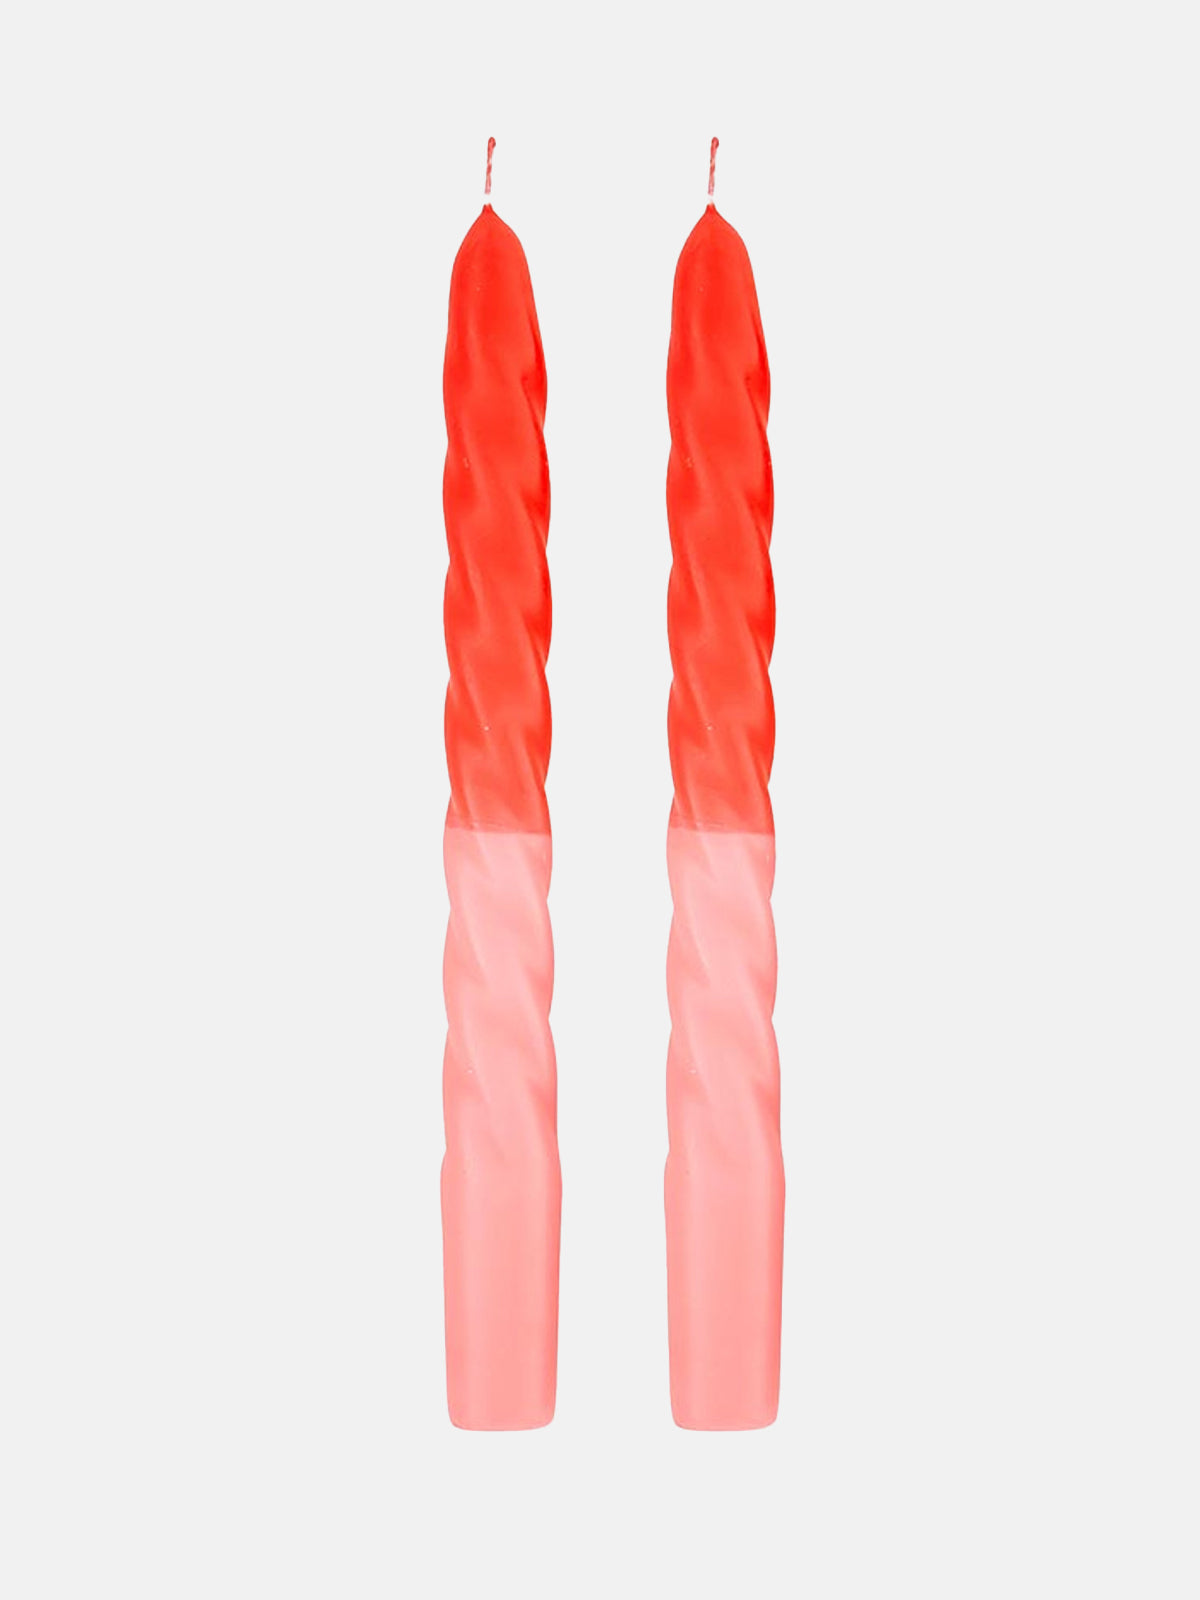 Red & Pink Taper Candles